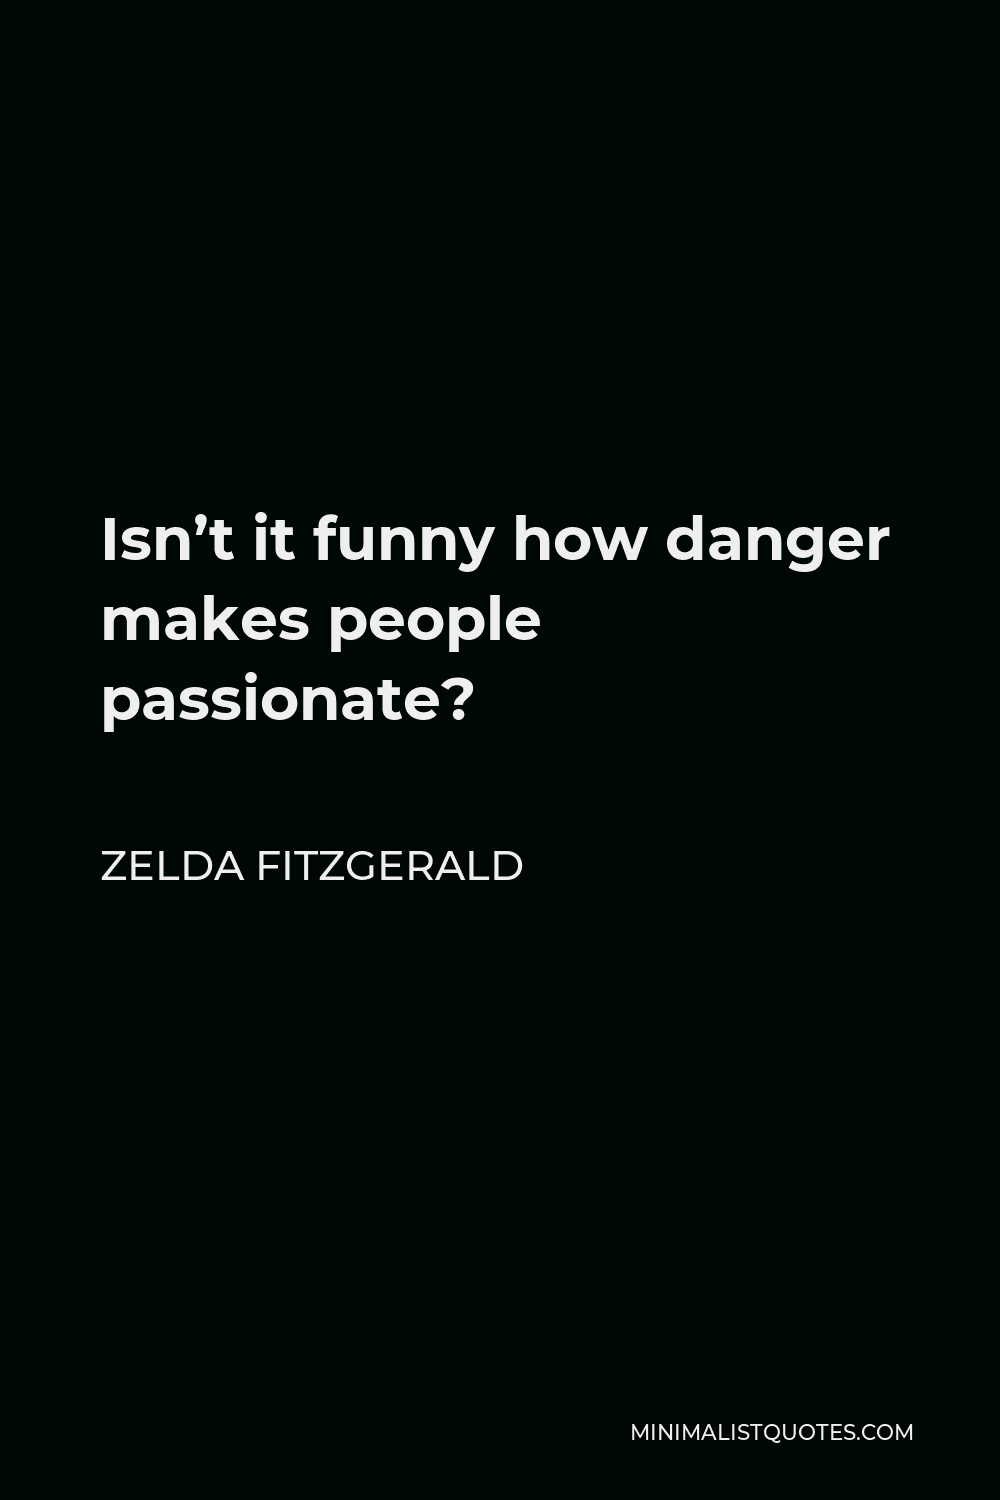 Zelda Fitzgerald Quote - Isn’t it funny how danger makes people passionate?